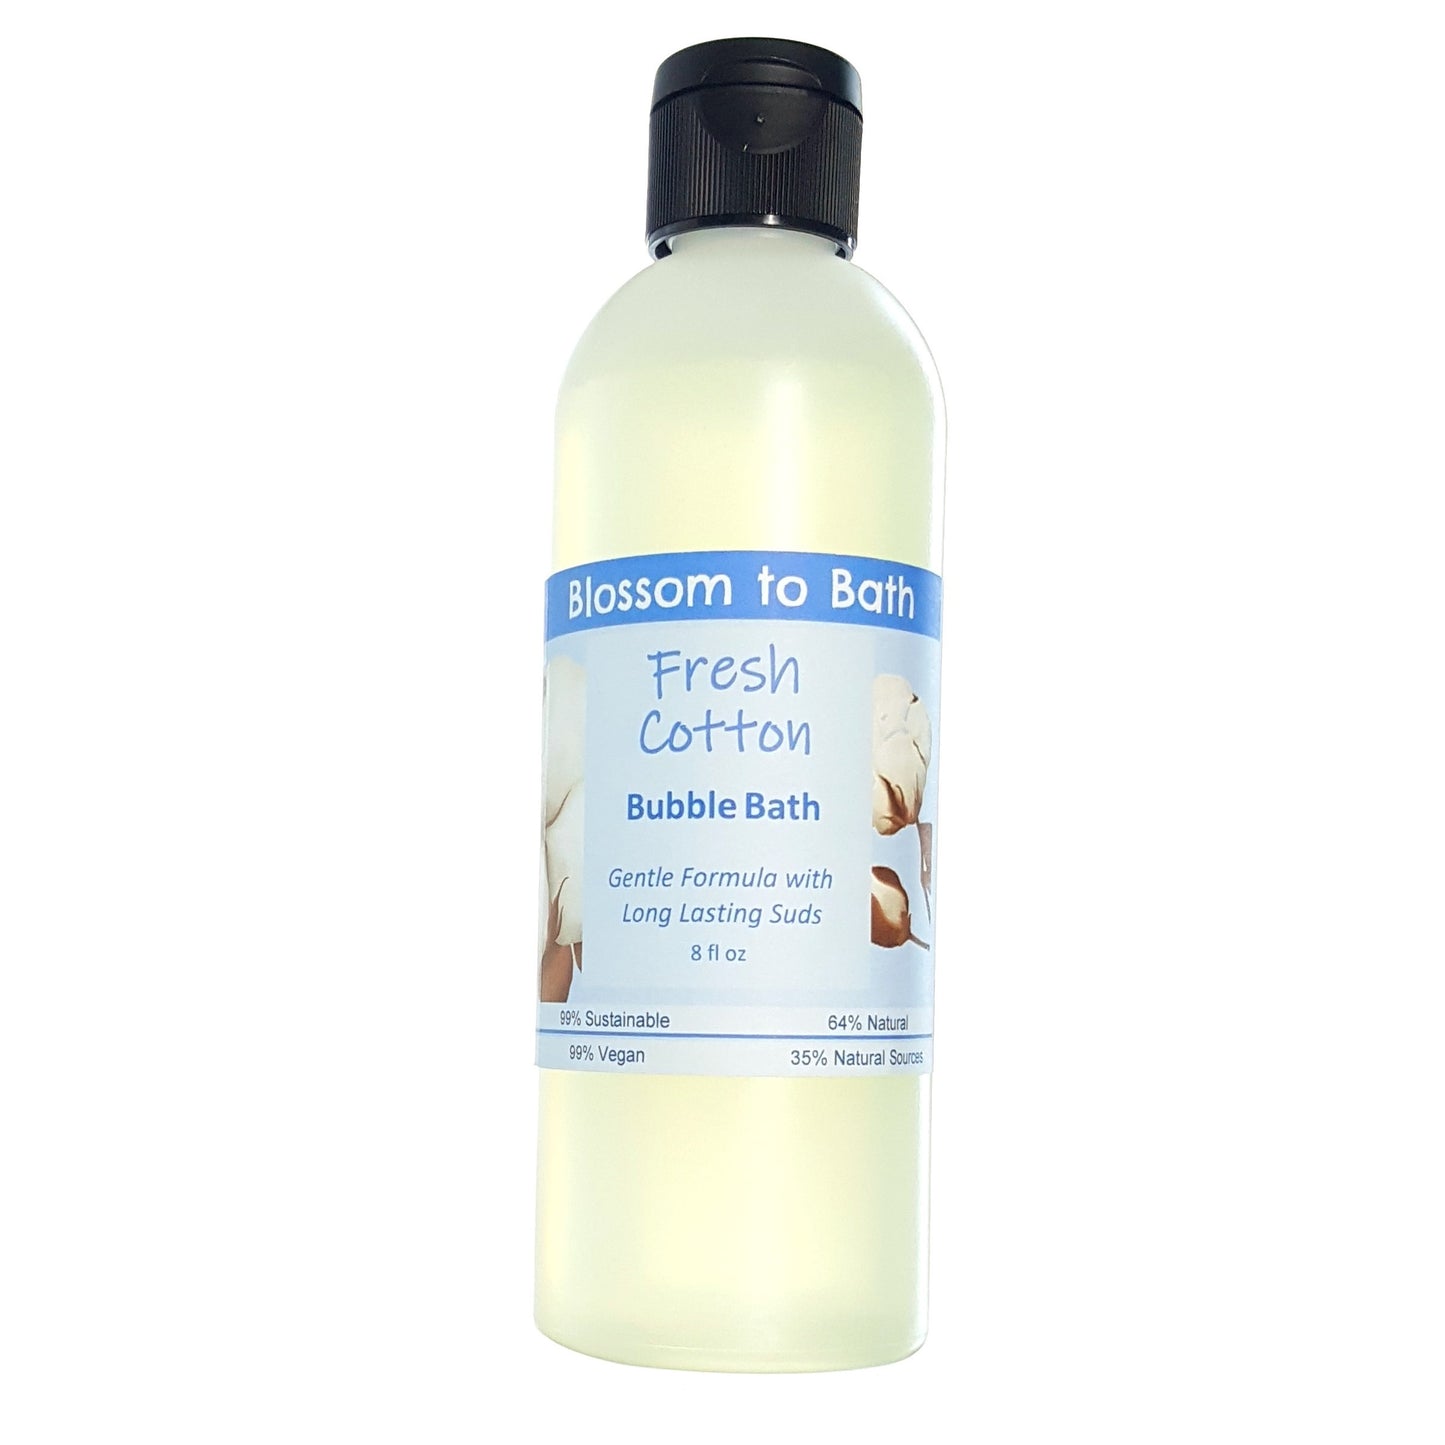 Buy Blossom to Bath Fresh Cotton Bubble Bath from Flowersong Soap Studio.  Lively, long lasting  bubbles in a gentle plant based formula for maximum relaxation time  Smells like clean sheets drying in a breeze of spring blossoms.